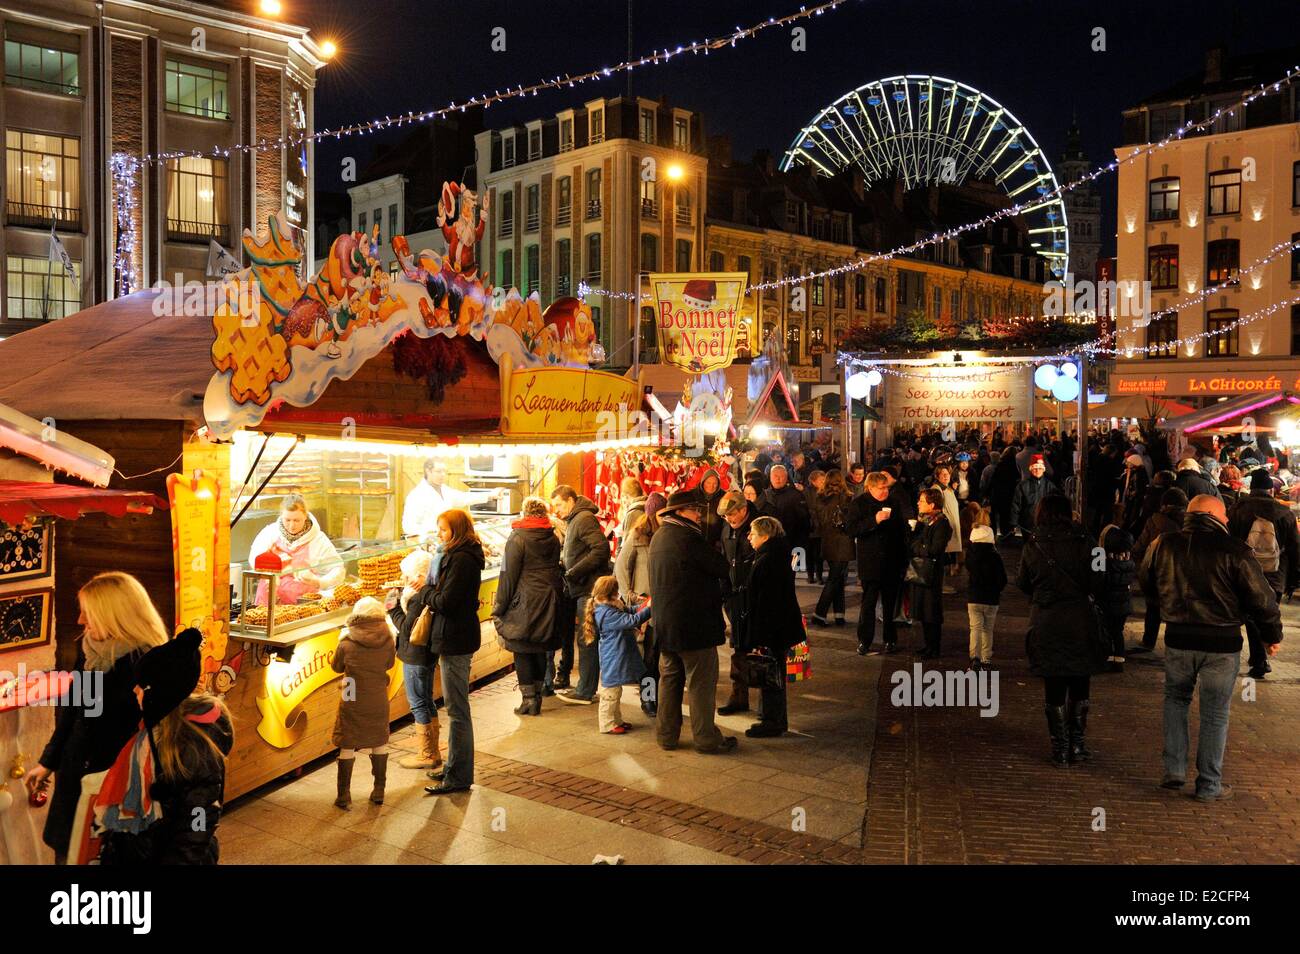 France, Nord, Lille, Place Rihour, chalet selling waffles in the Christmas market by night Stock Photo